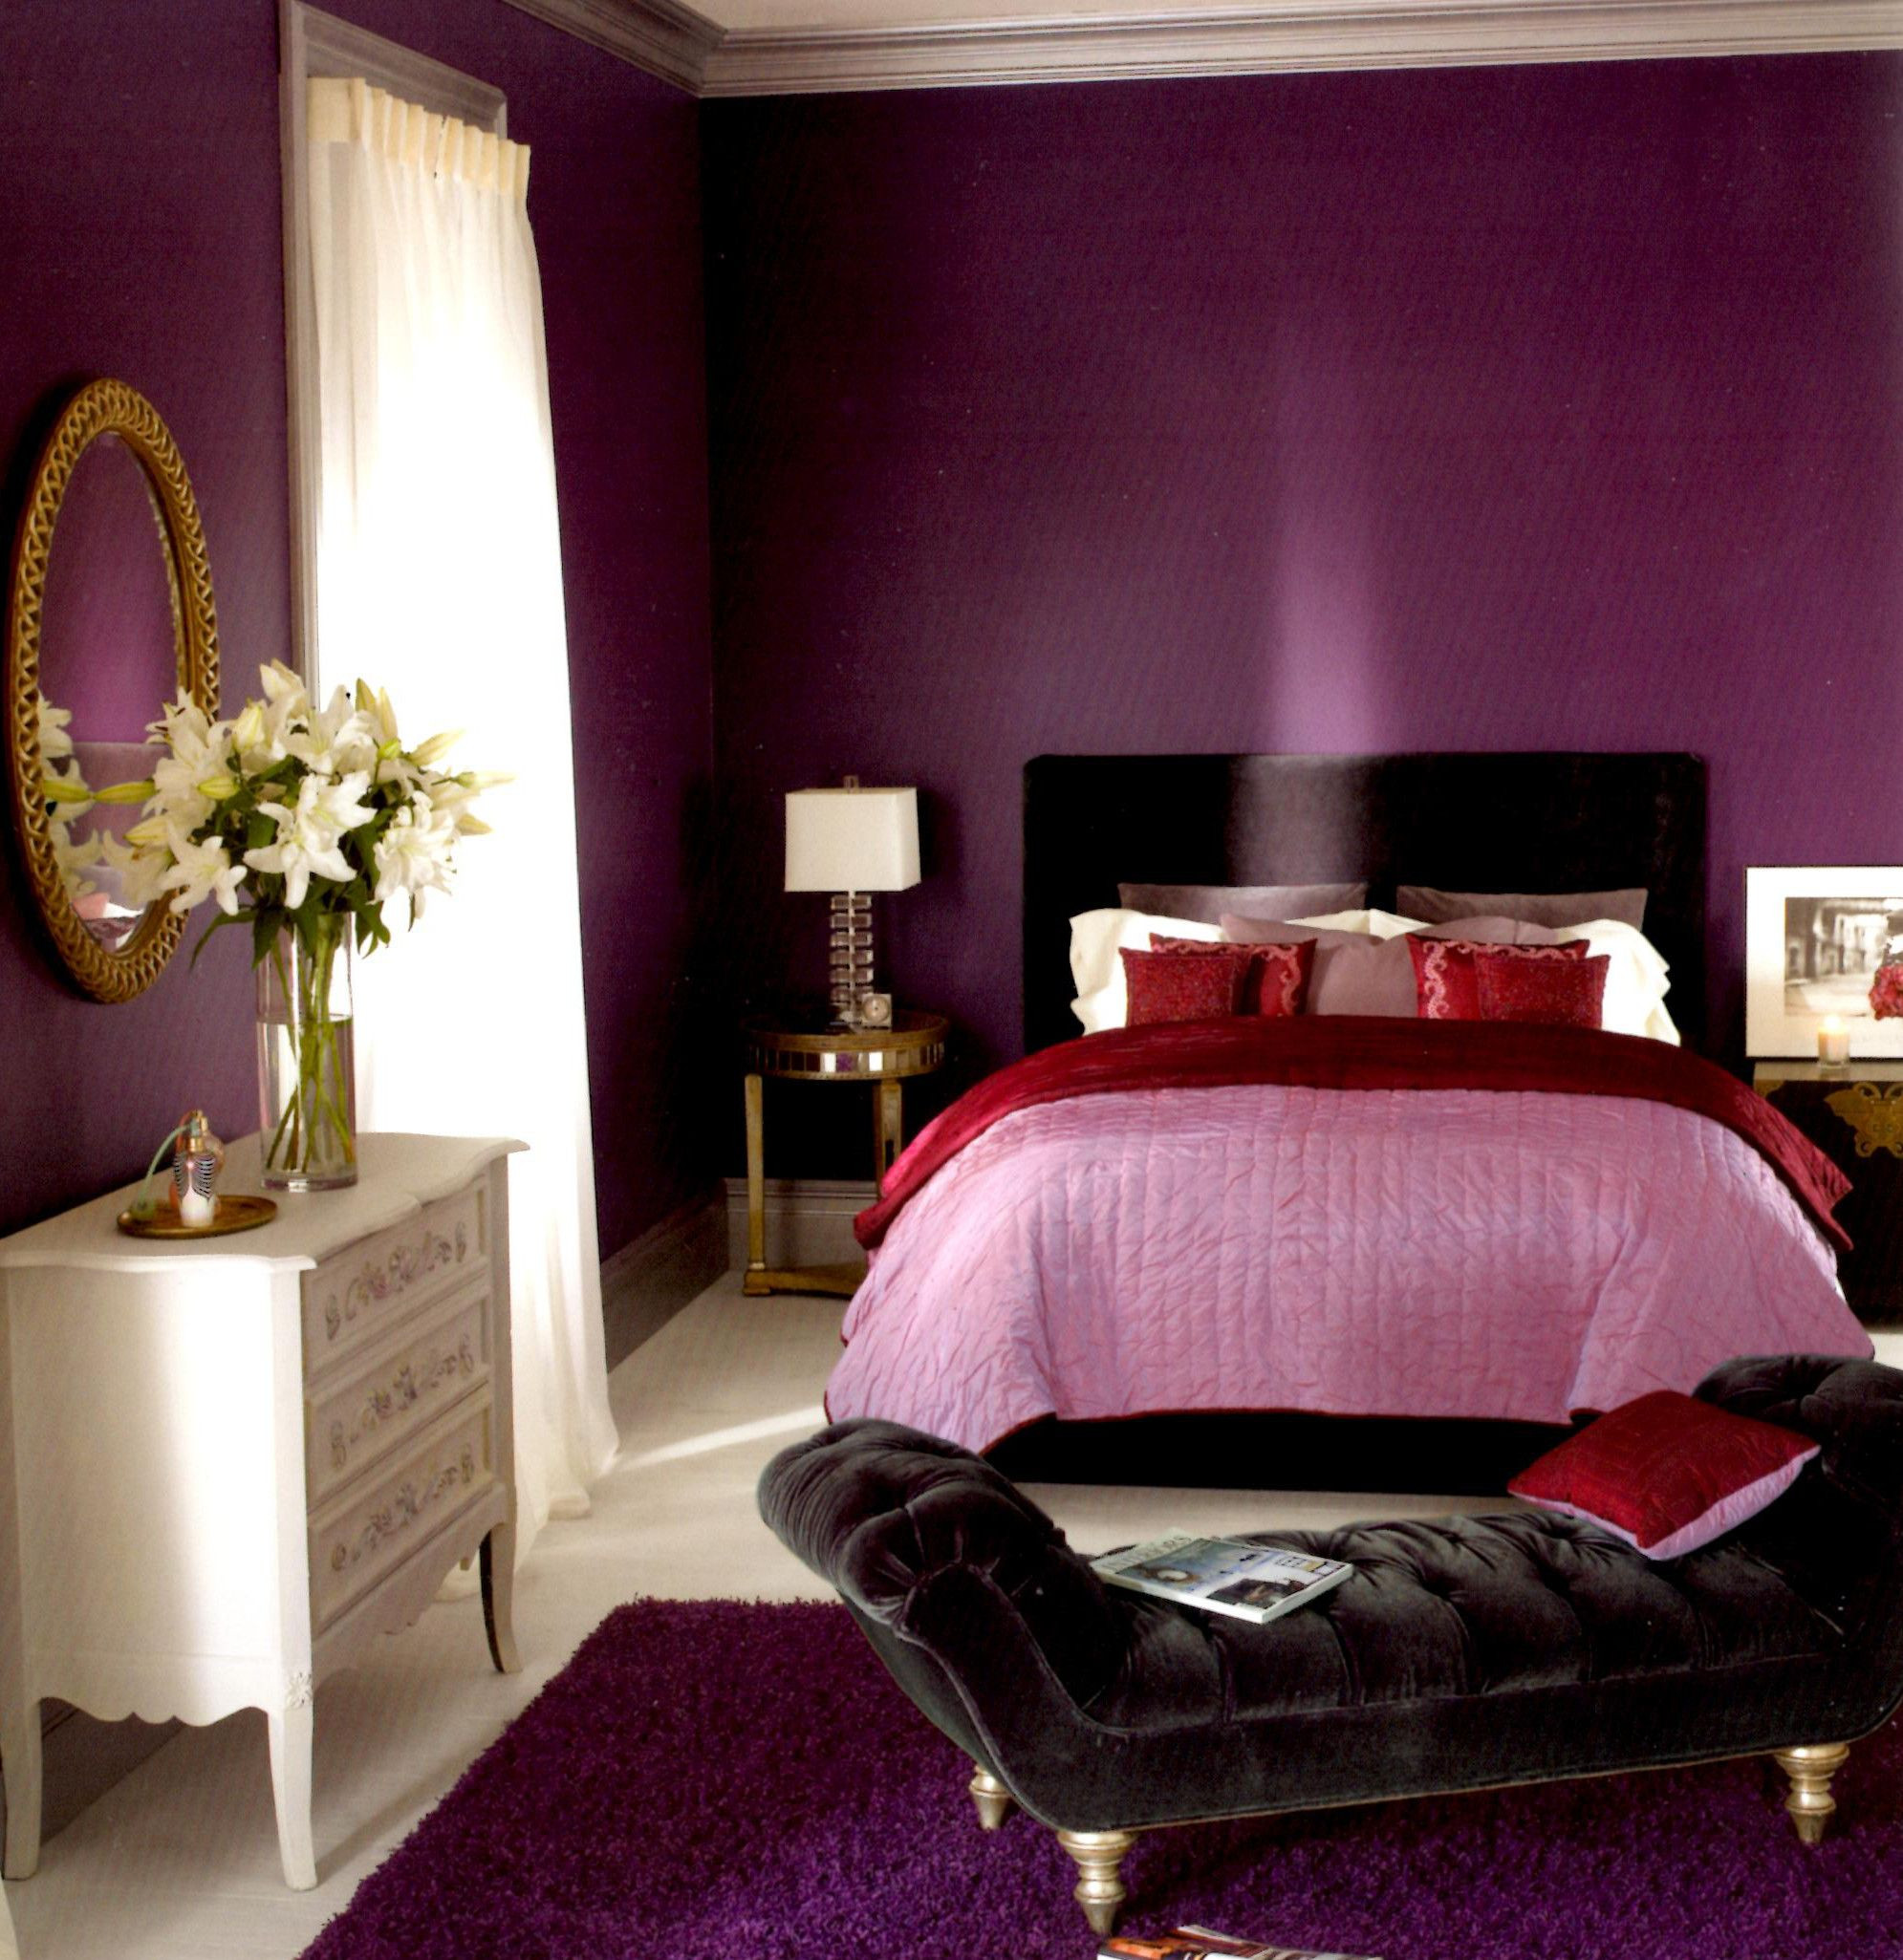 Purple Paint Color For Bedroom
 The Bedroom in this purple bedroom color ideas looks